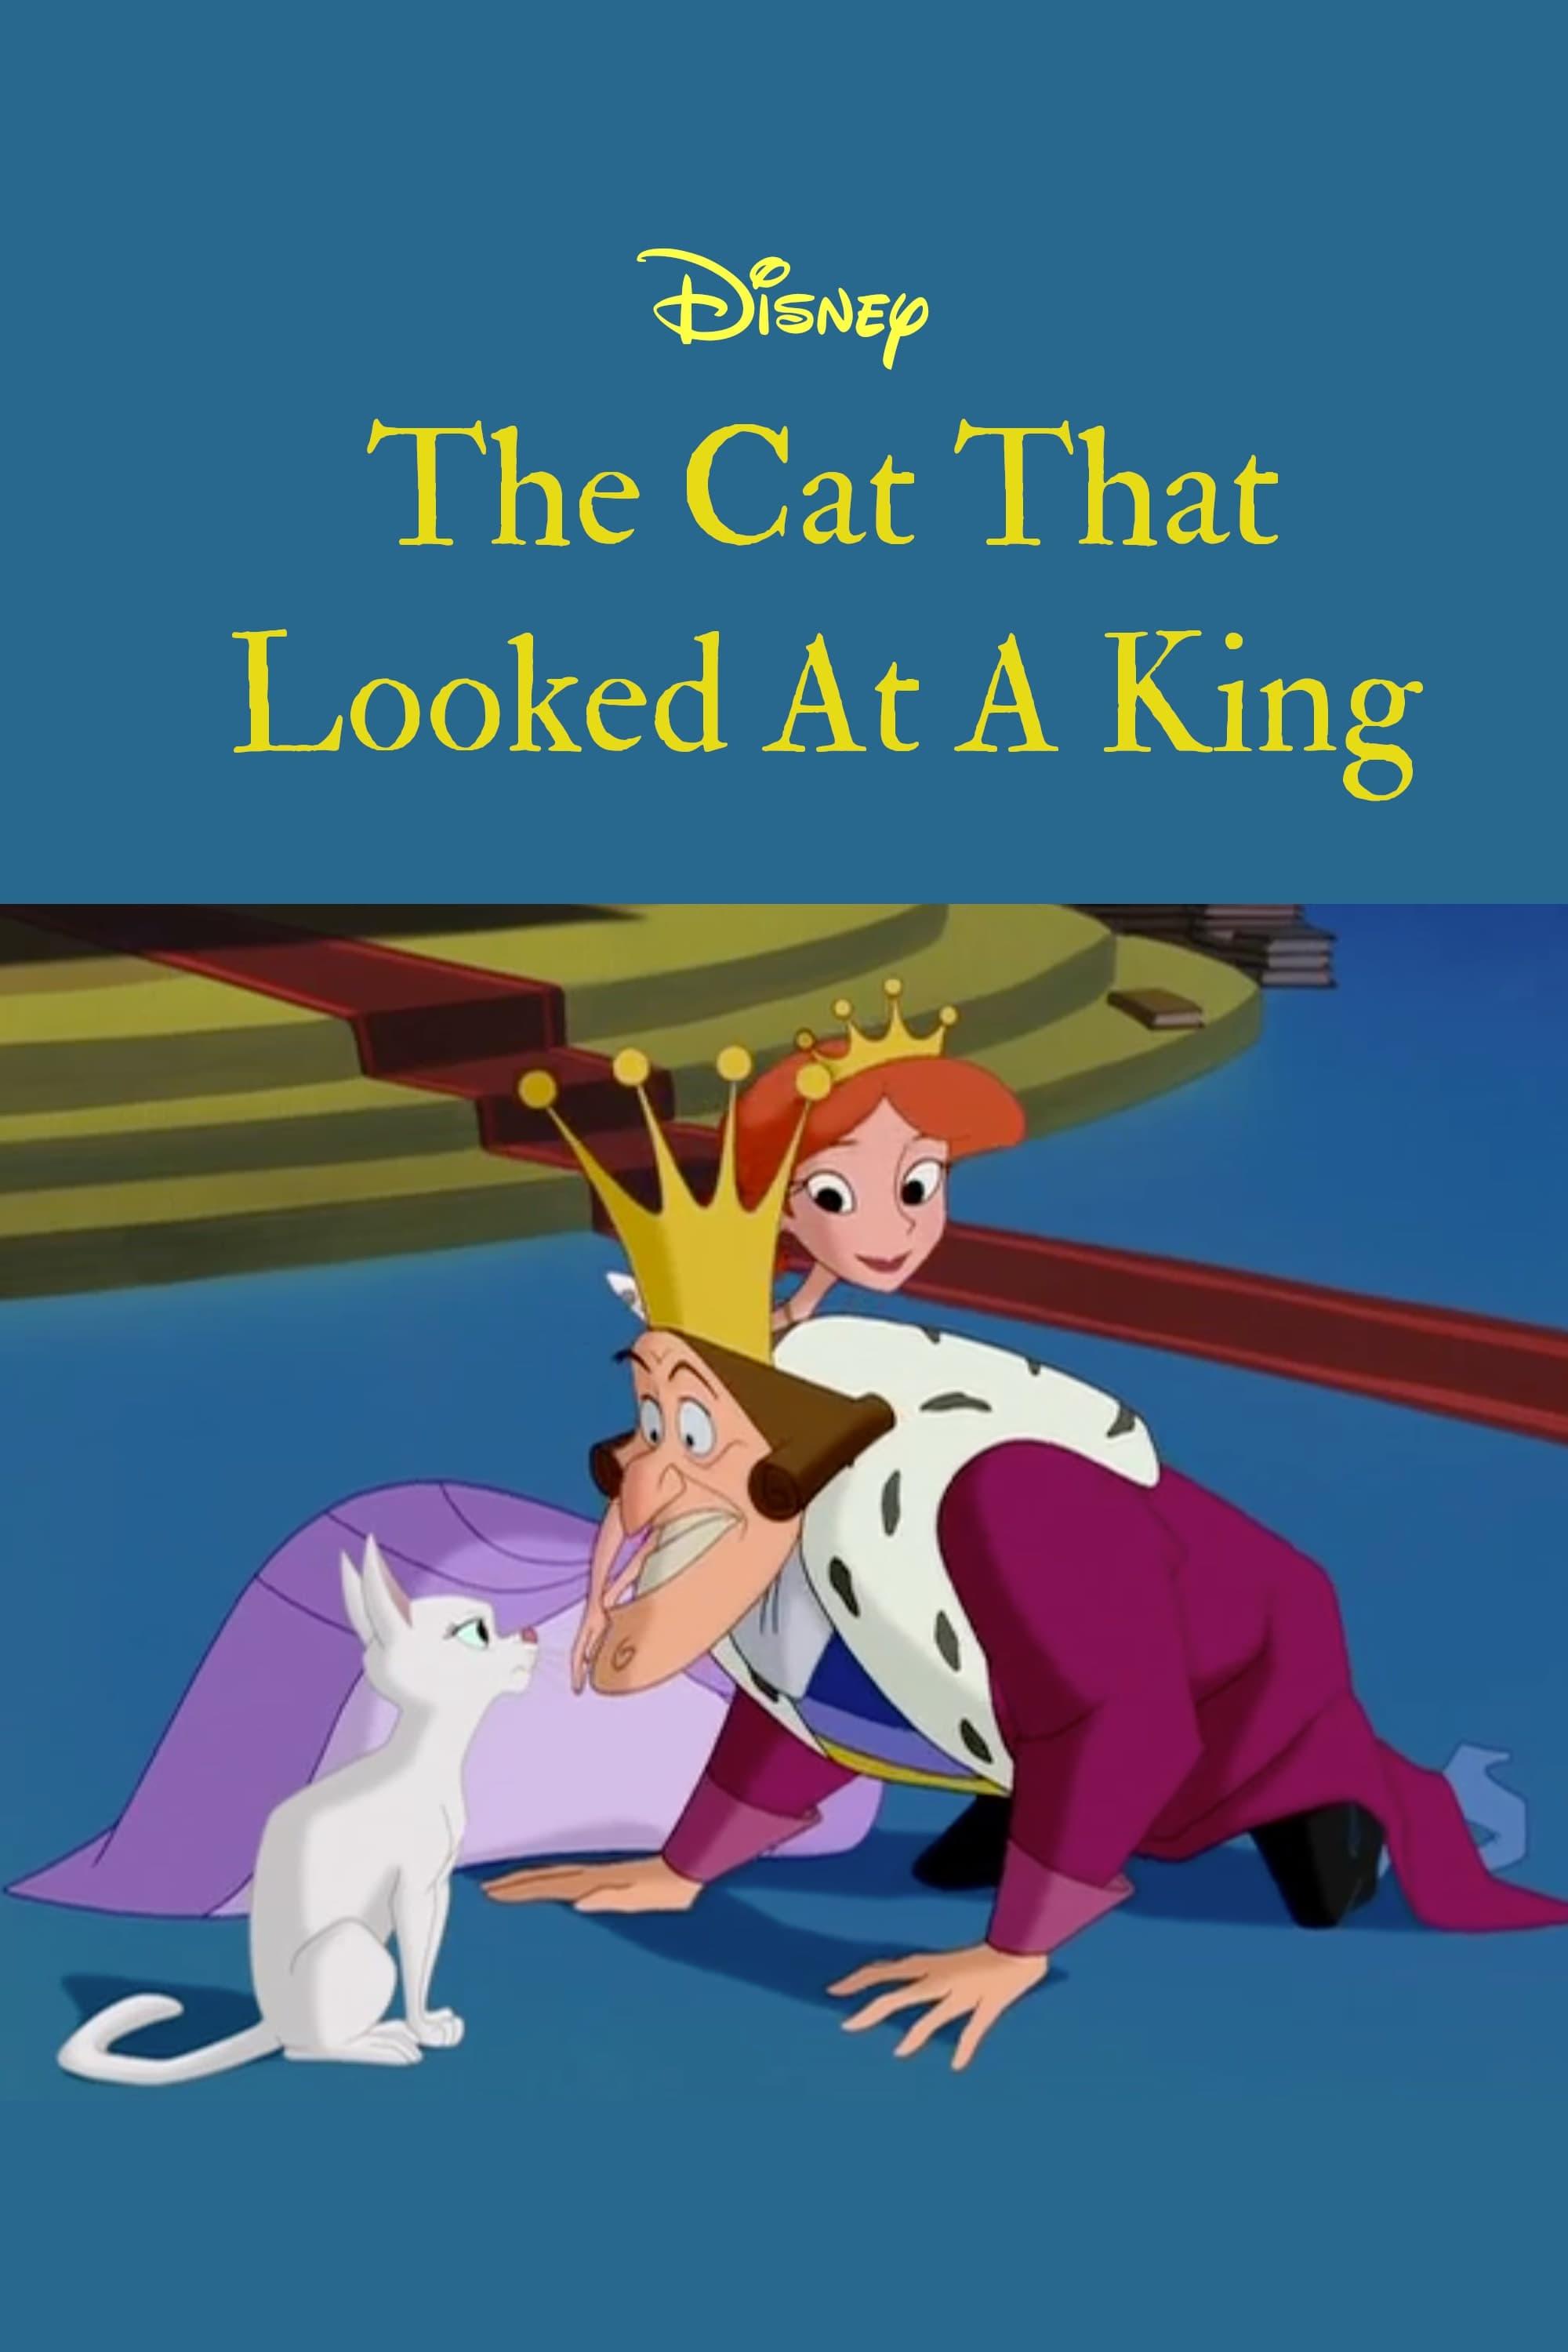 The Cat That Looked at a King poster